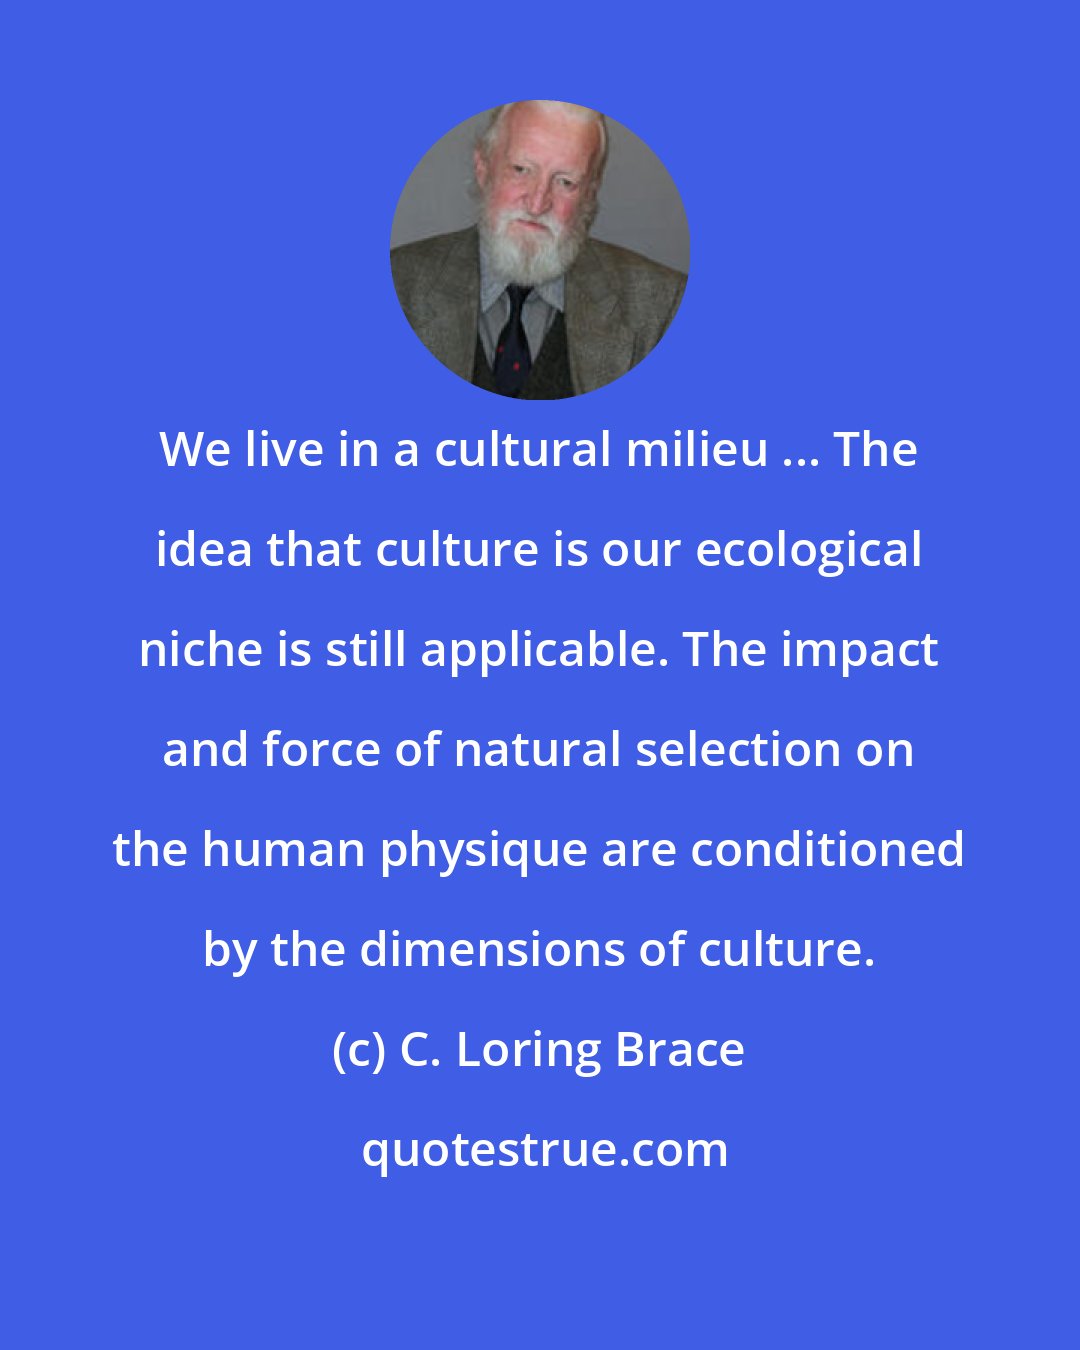 C. Loring Brace: We live in a cultural milieu ... The idea that culture is our ecological niche is still applicable. The impact and force of natural selection on the human physique are conditioned by the dimensions of culture.